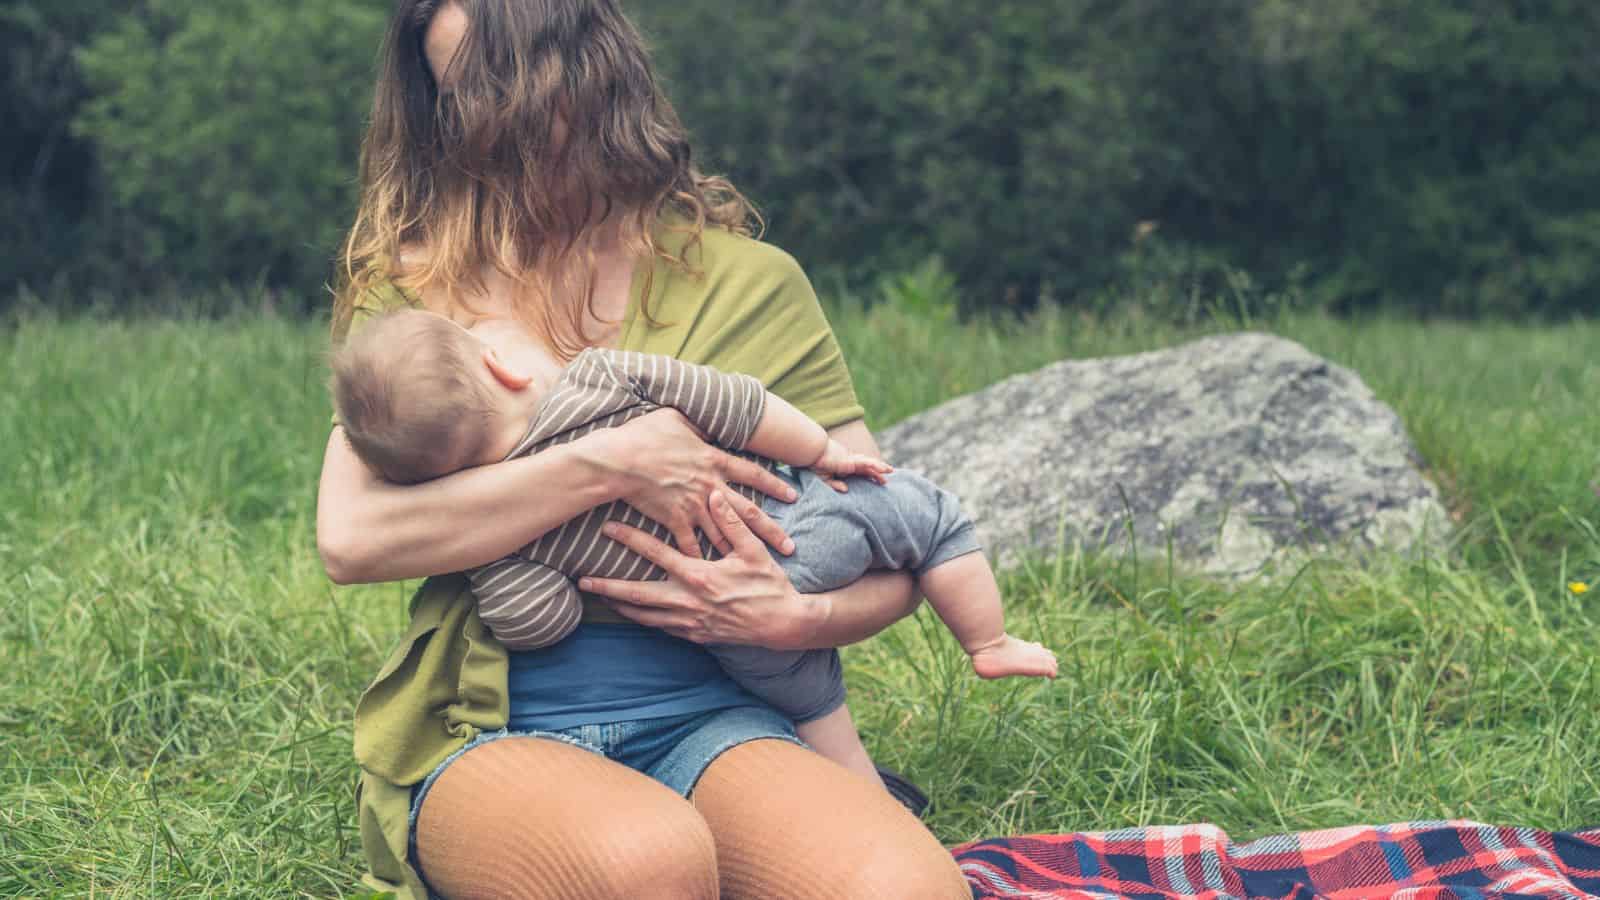 why is breastfeeding in public controversial